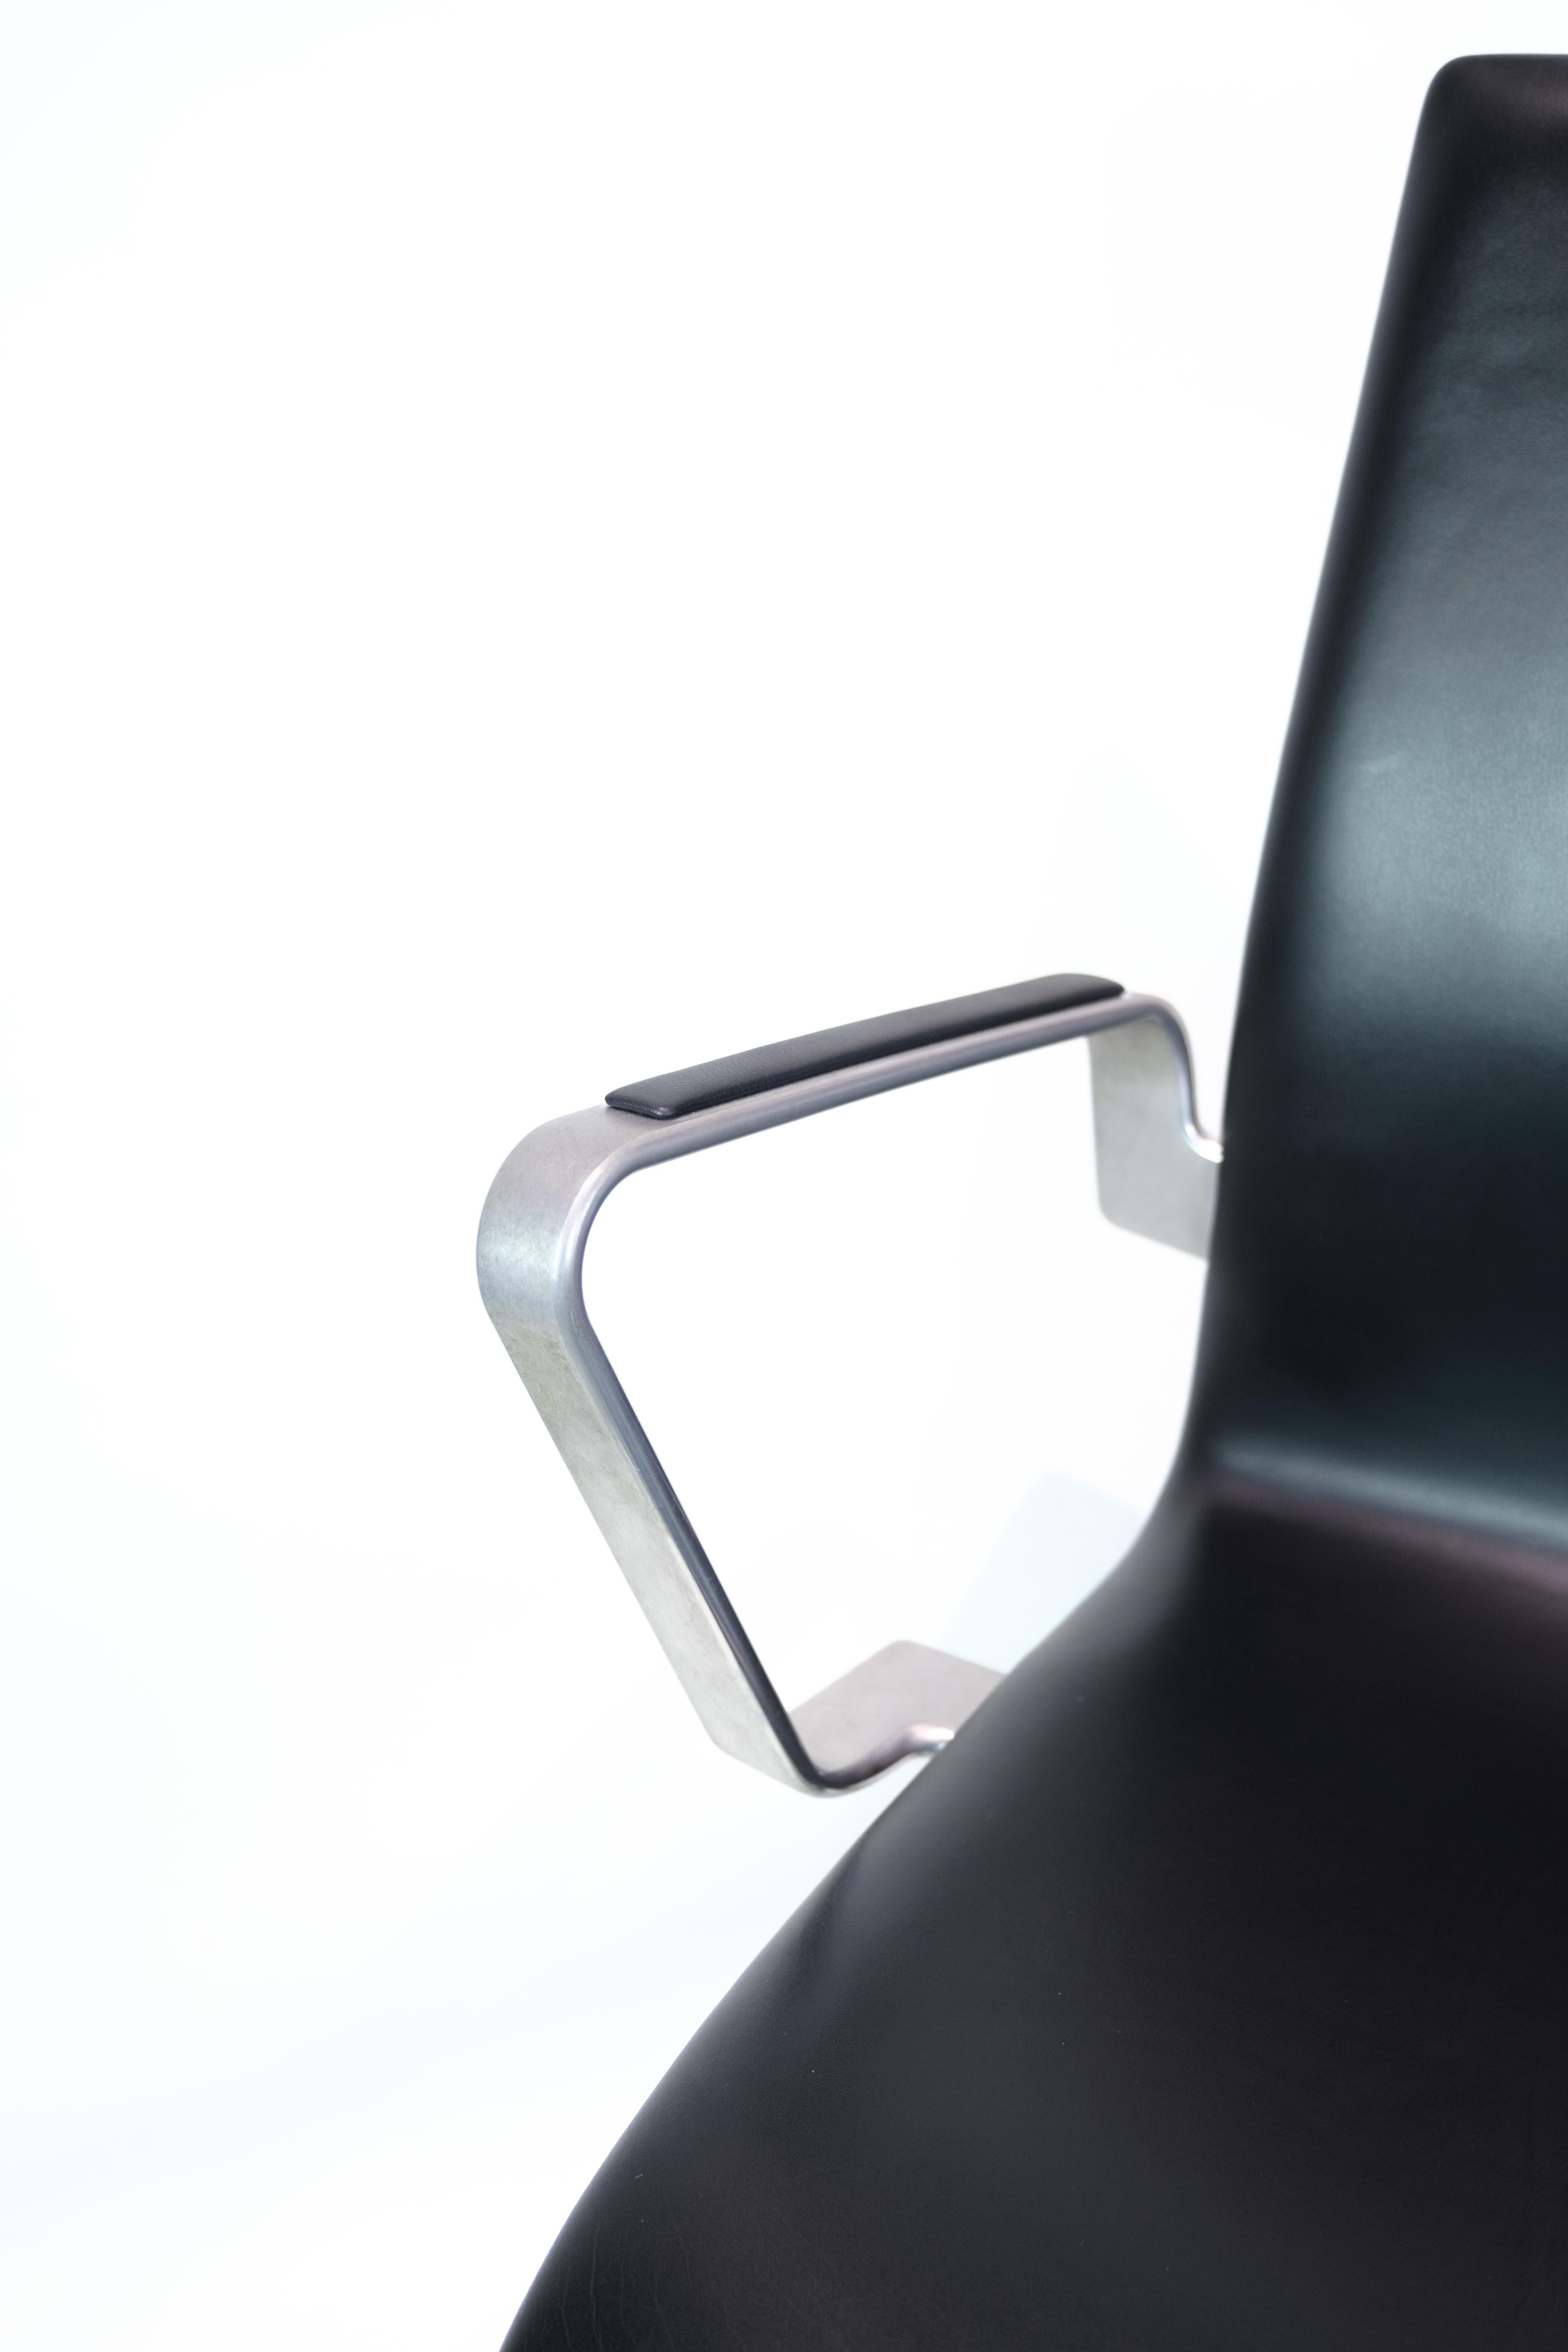 Mid-Century Modern Desk chair, Model 3271W Oxford in Black Leather by Arne Jacobsen from 1980 For Sale